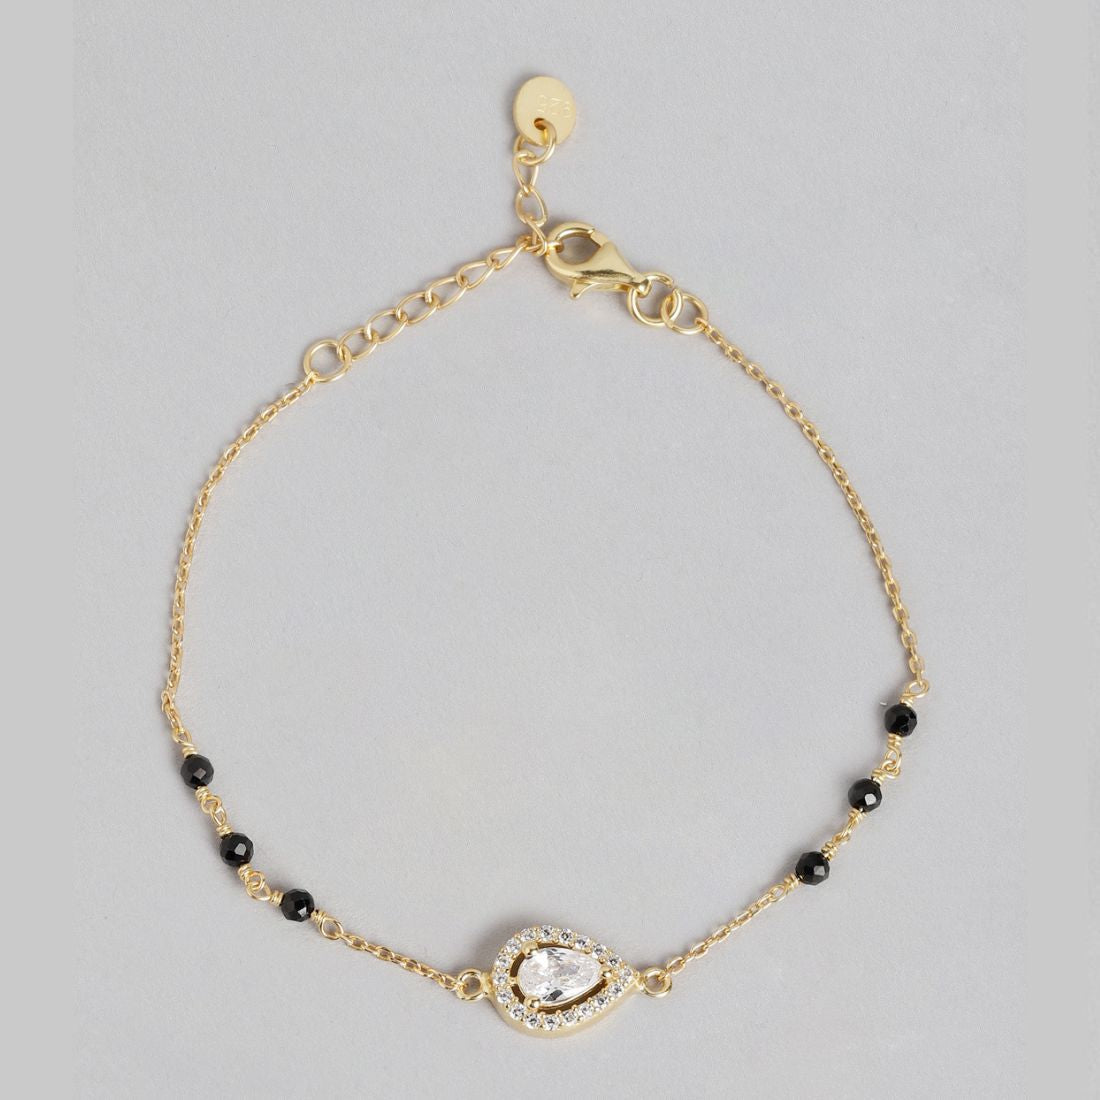 Golden Blush Gold-Plated 925 Sterling Silver Bracelet with Cubic Zirconia